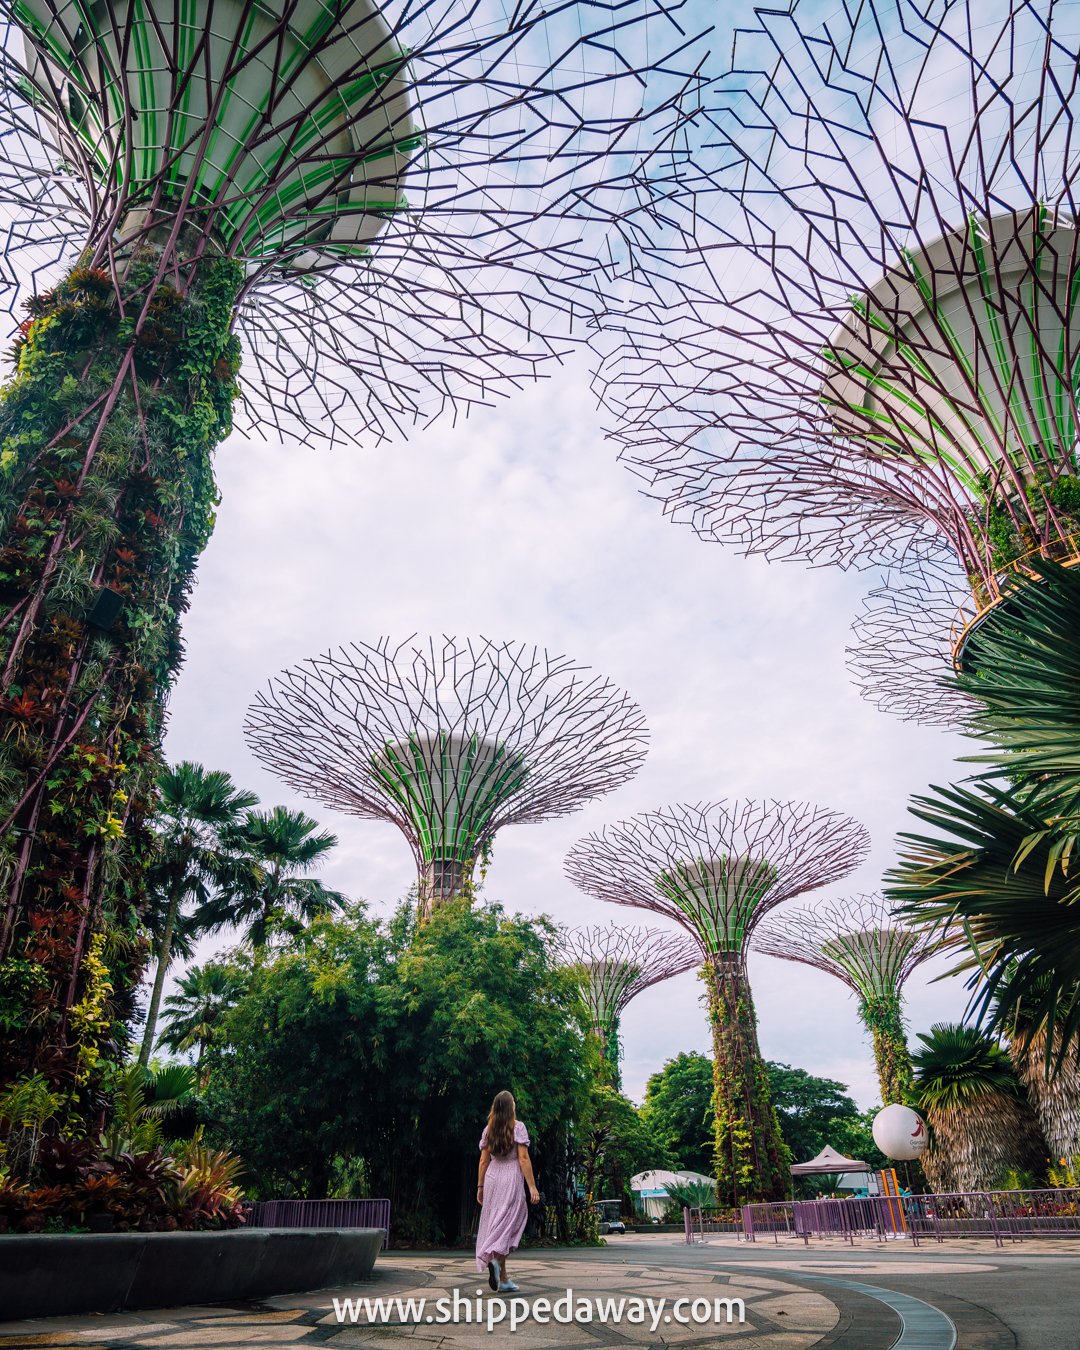 Best free thing to do in Gardens by the Bay and Singapore - visit Supertree Grove